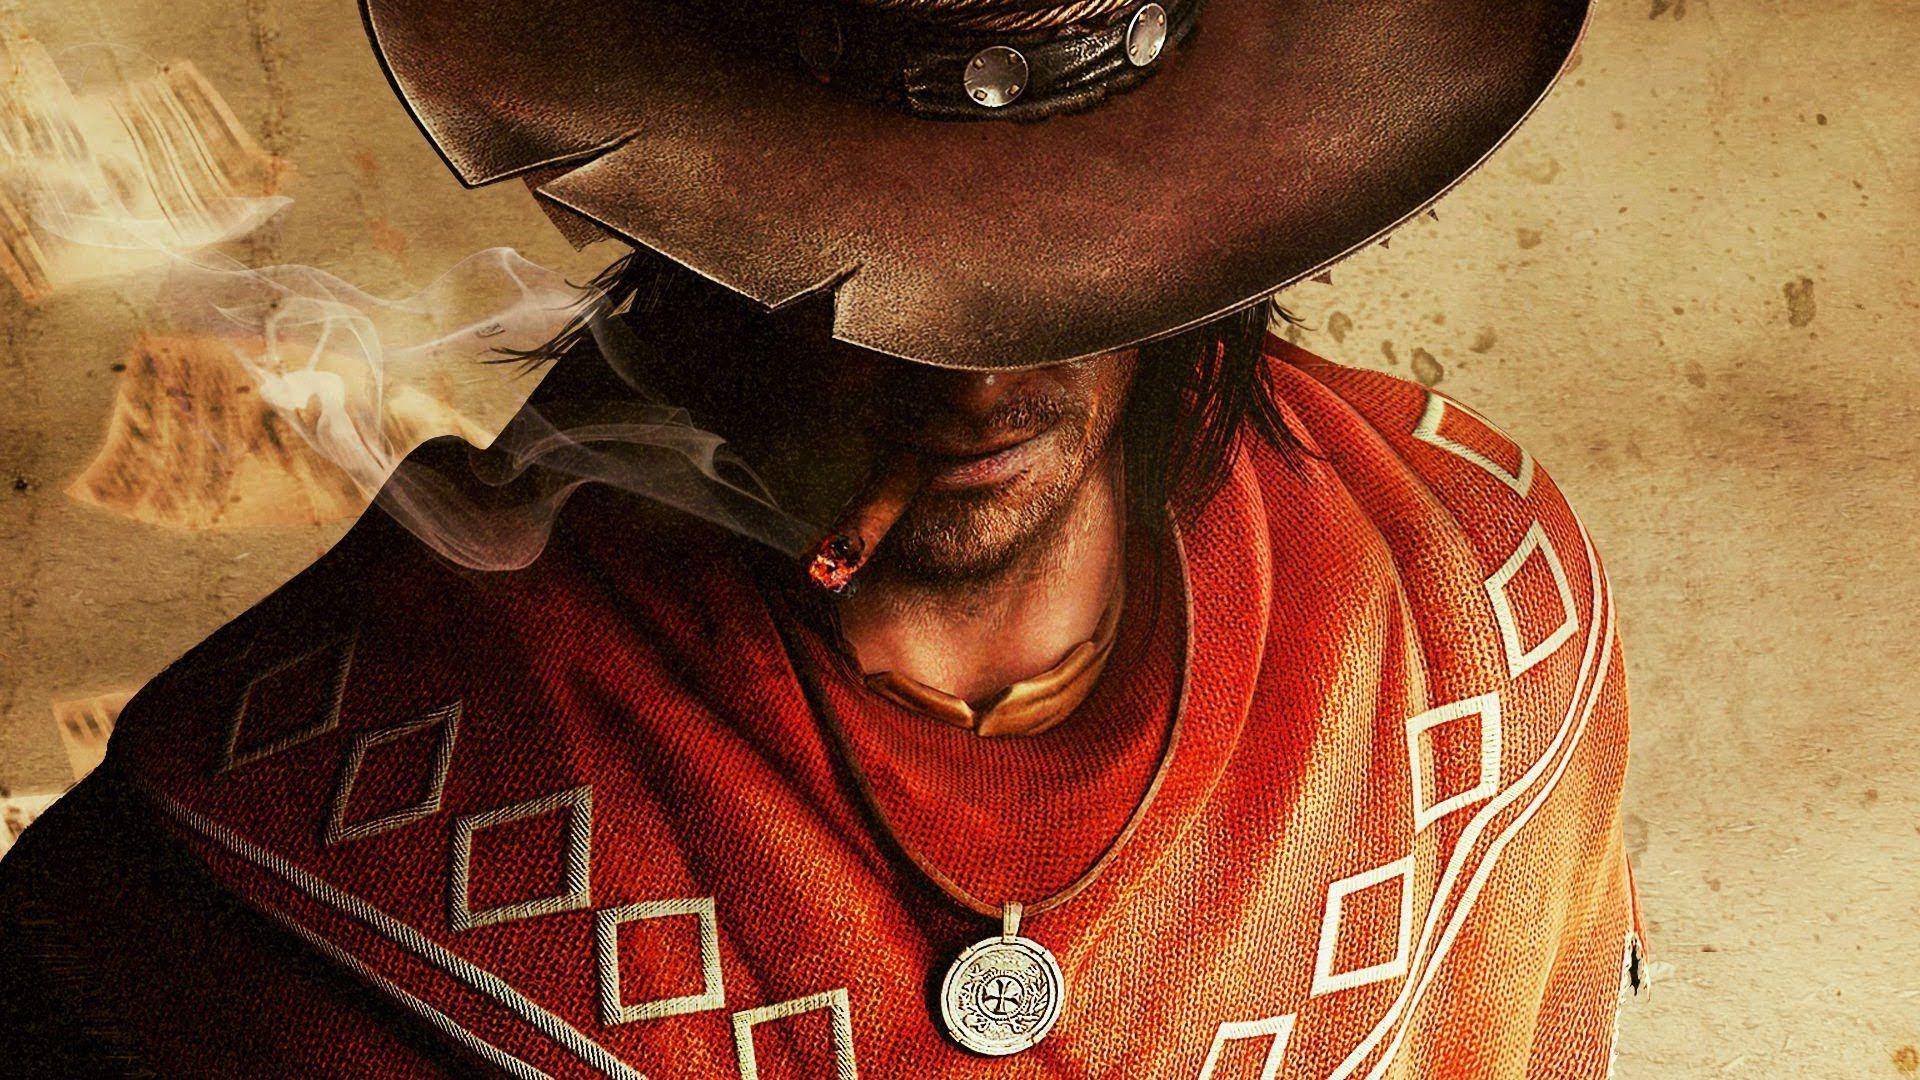 Call of Juarez says Red Dead 2's Arthur Morgan 'will be one